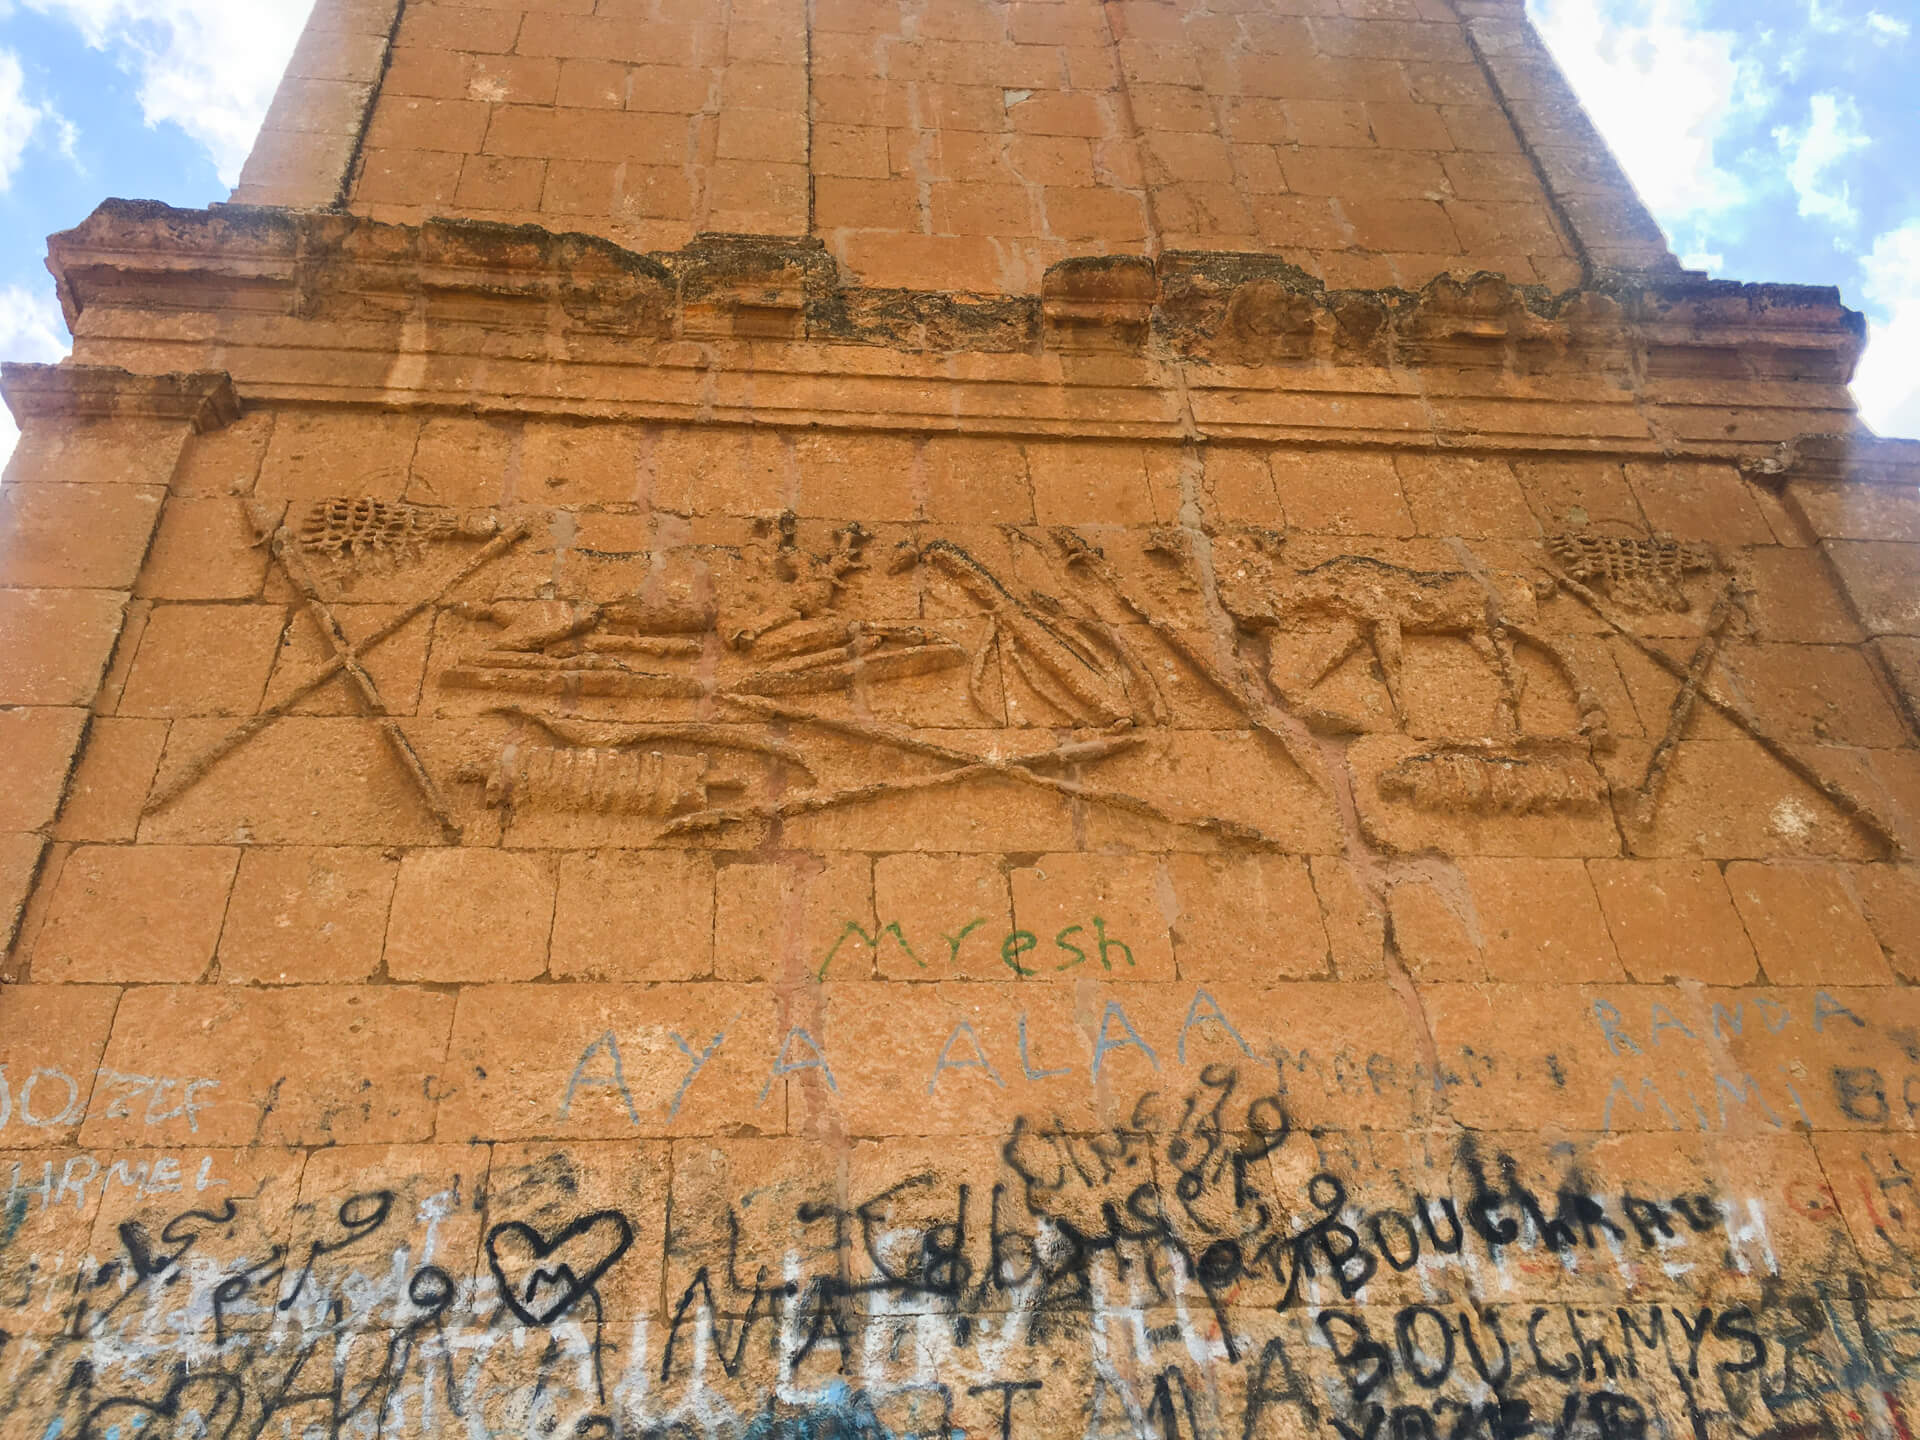 One of the reliefs on the Pyramid of Hermel with graffiti at the bottom.